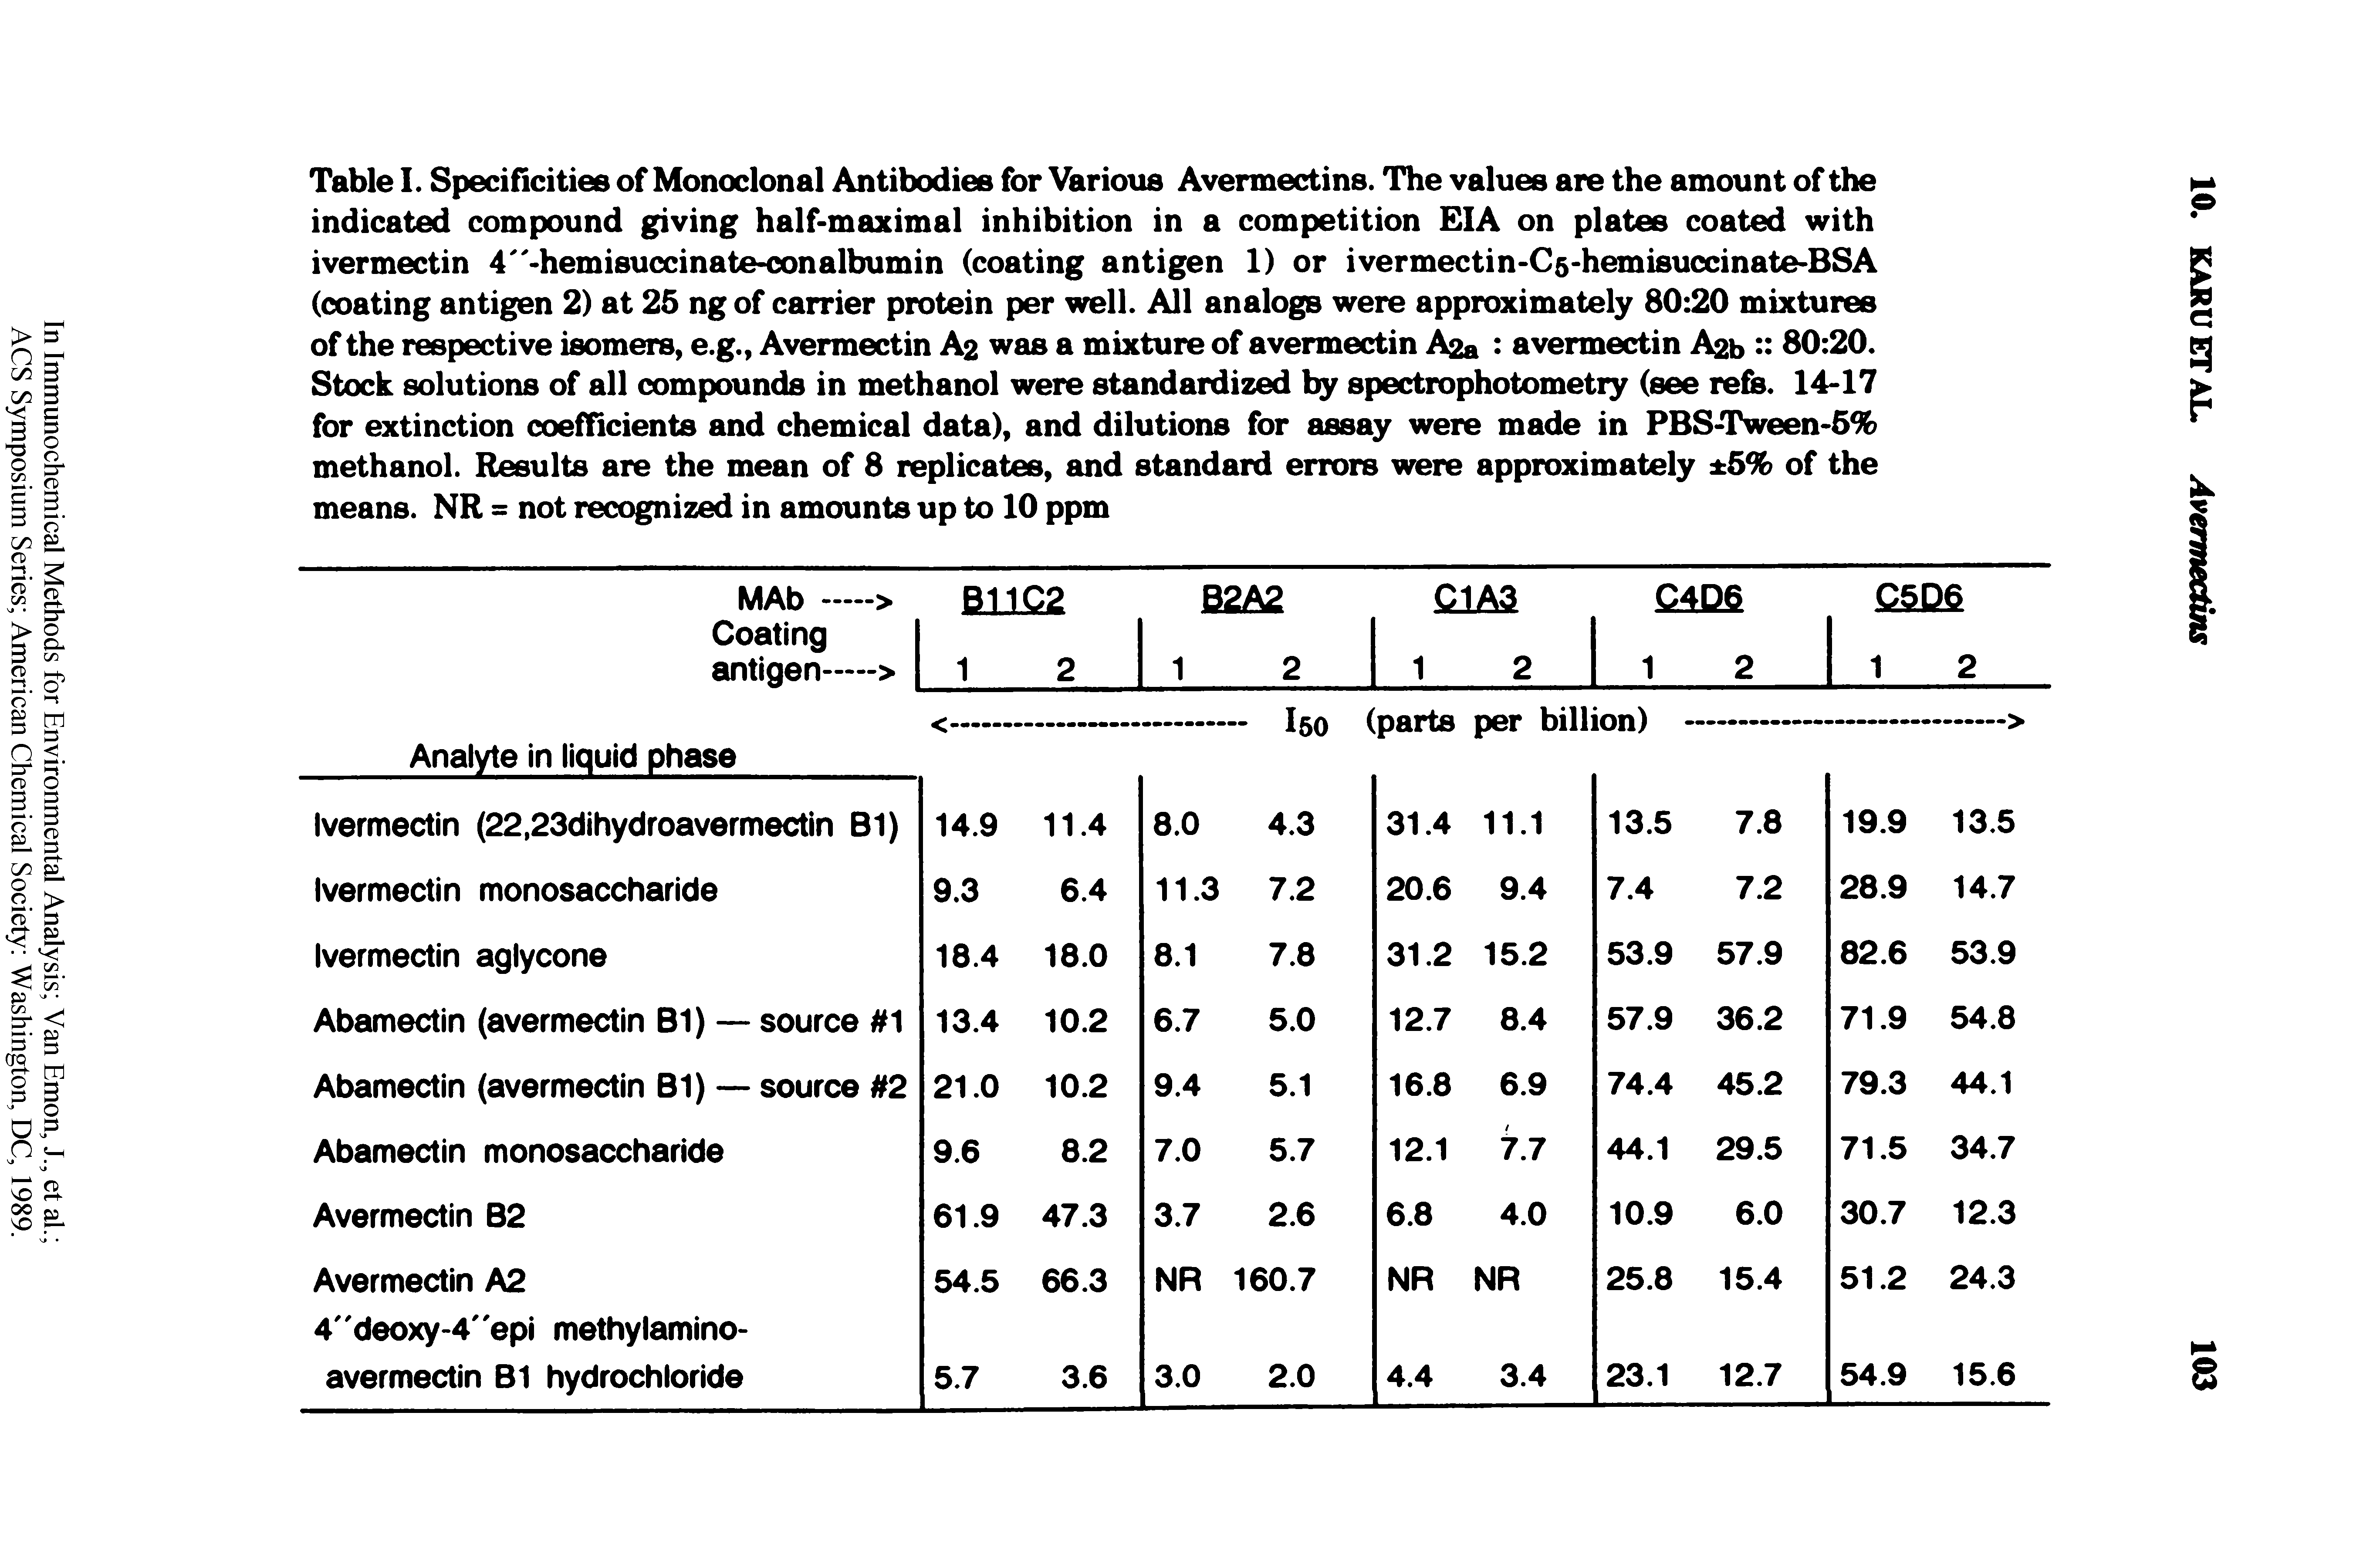 Table I. Specificities of Monoclonal Antibodies for Various Avermectins. The values are the amount of the indicated compound giving half-maximal inhibition in a competition EIA on plates coated with ivermectin 4 -hemisuccinate-conalbumin (coating antigen 1) or ivermectin-Cg-hemisuccinate-BSA (coating antigen 2) at 25 ng of carrier protein per well. All analogs were approximately 80 20 mixtures of the respective isomers, e.g., Avermectin A2 was a mixture of avermectin A2a avermectin Agb 80 20. Stock solutions of all compounds in methanol were standardized by spectrophotometry (see refs. 14-17 for extinction coefficients and chemical data), and dilutions for assay were made in PBS-Tween-5% methanol. Results are the mean of 8 replicates, and standard errors were approximately 5% of the means. NR = not recognized in amounts up to 10 ppm...